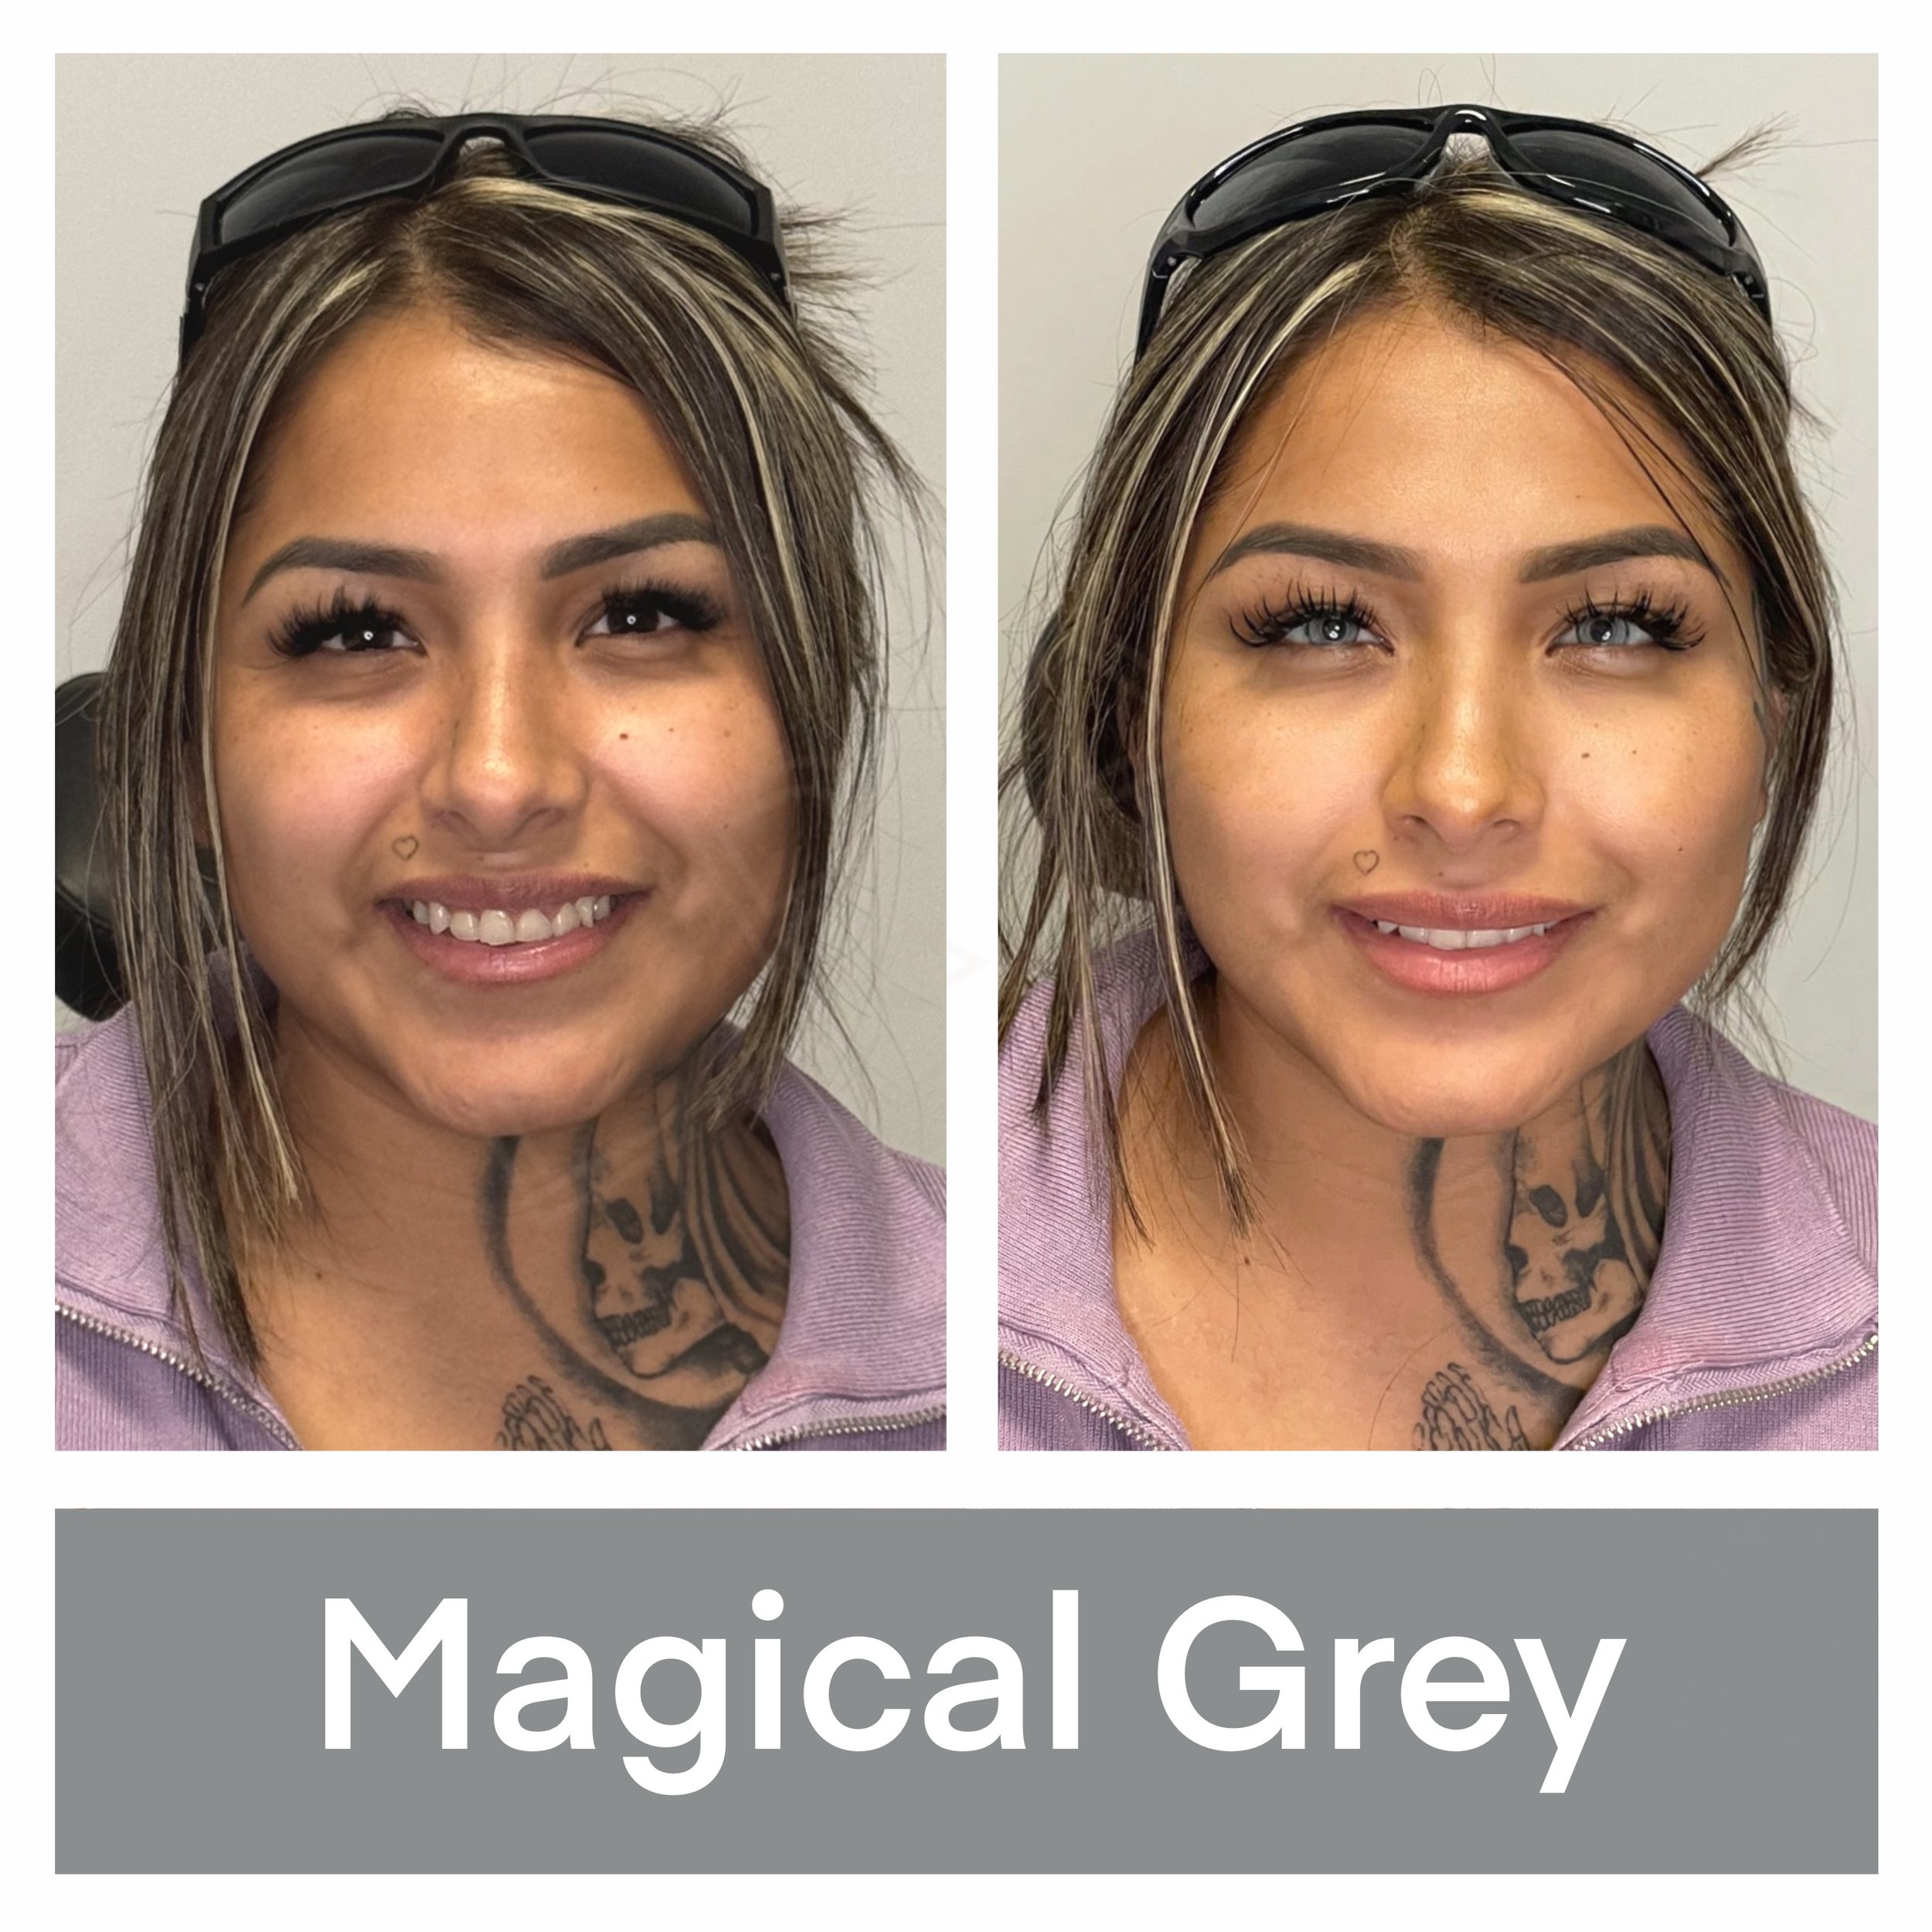 Eye Color Change with Magical Grey Pitgment at KERATO